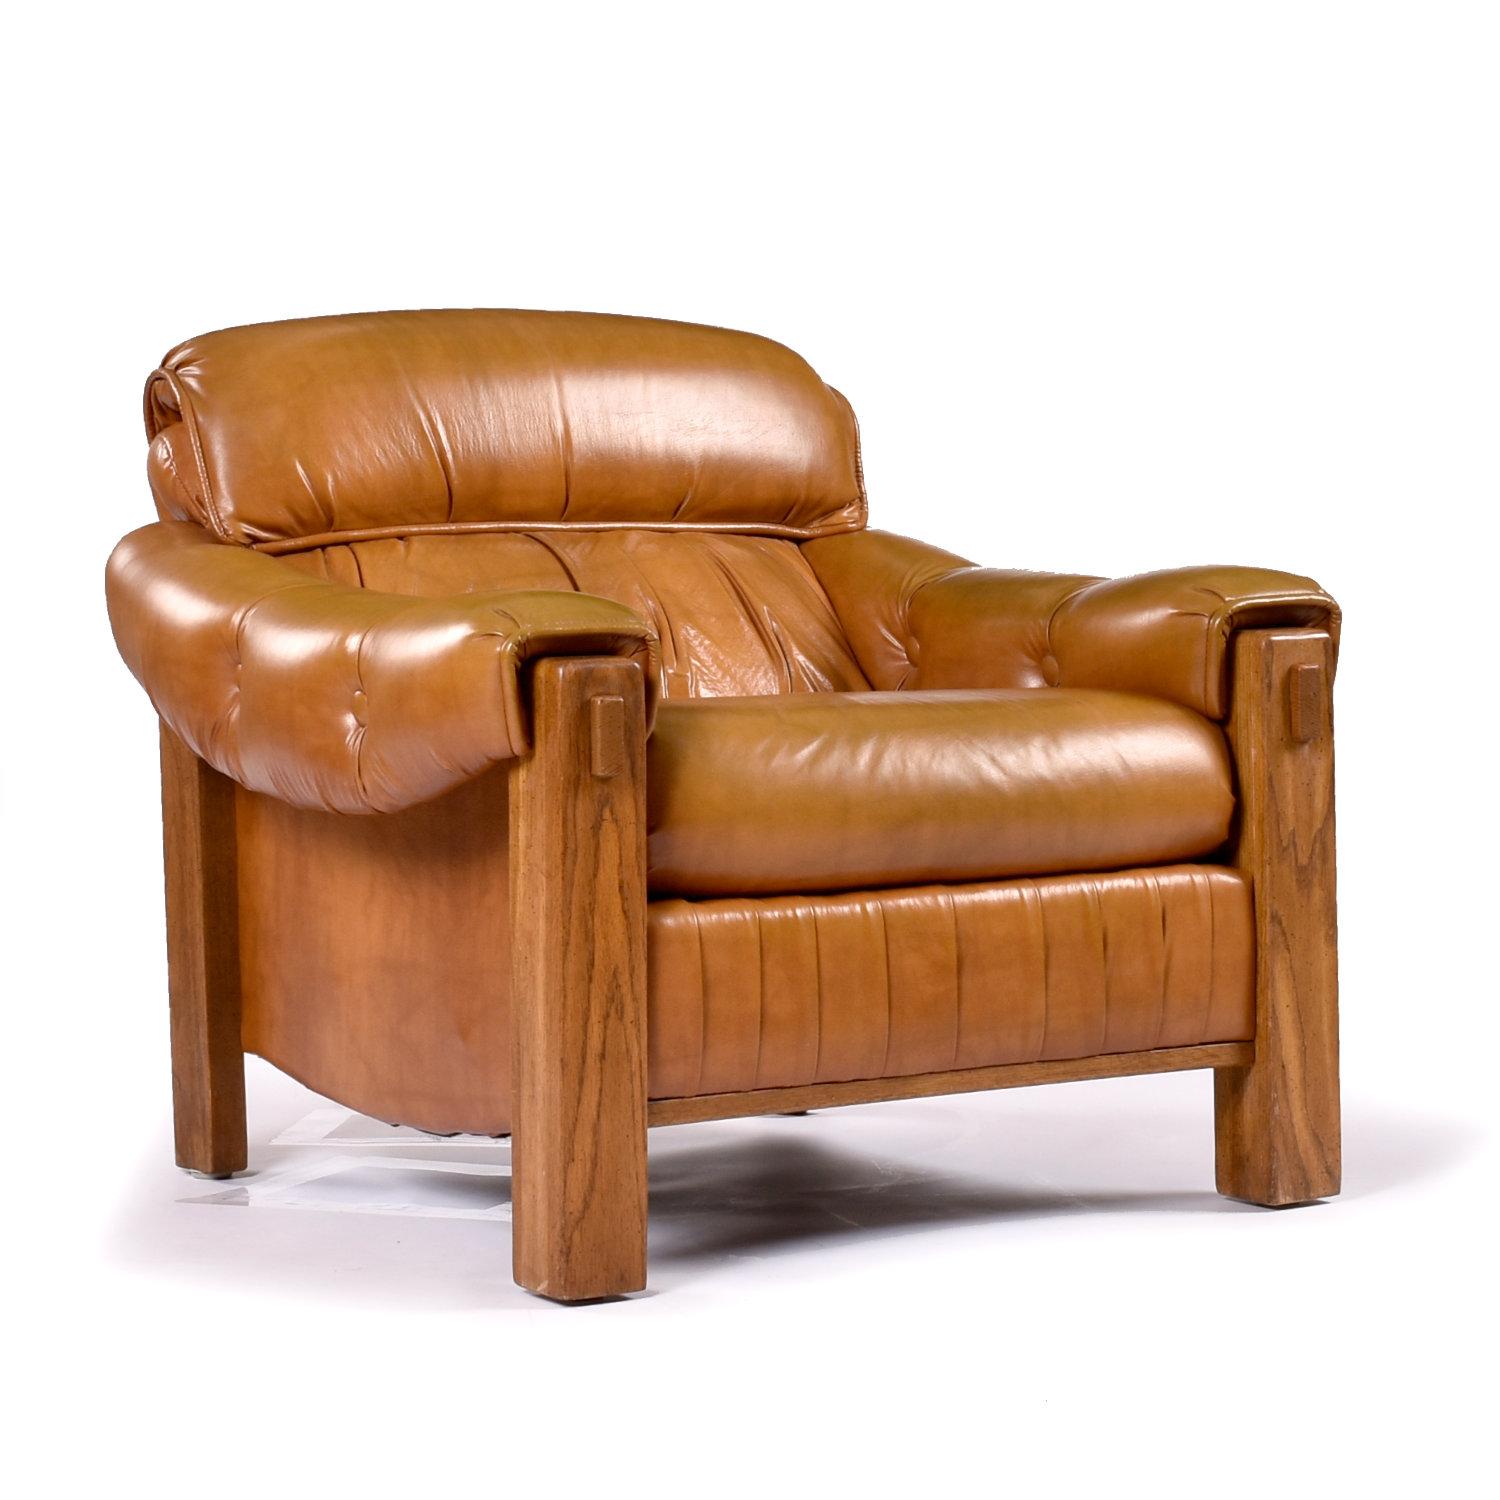 Pair of Vintage 1970s Ample Butterscotch Brown and Oak Tufted Club Chairs In Good Condition For Sale In Chattanooga, TN